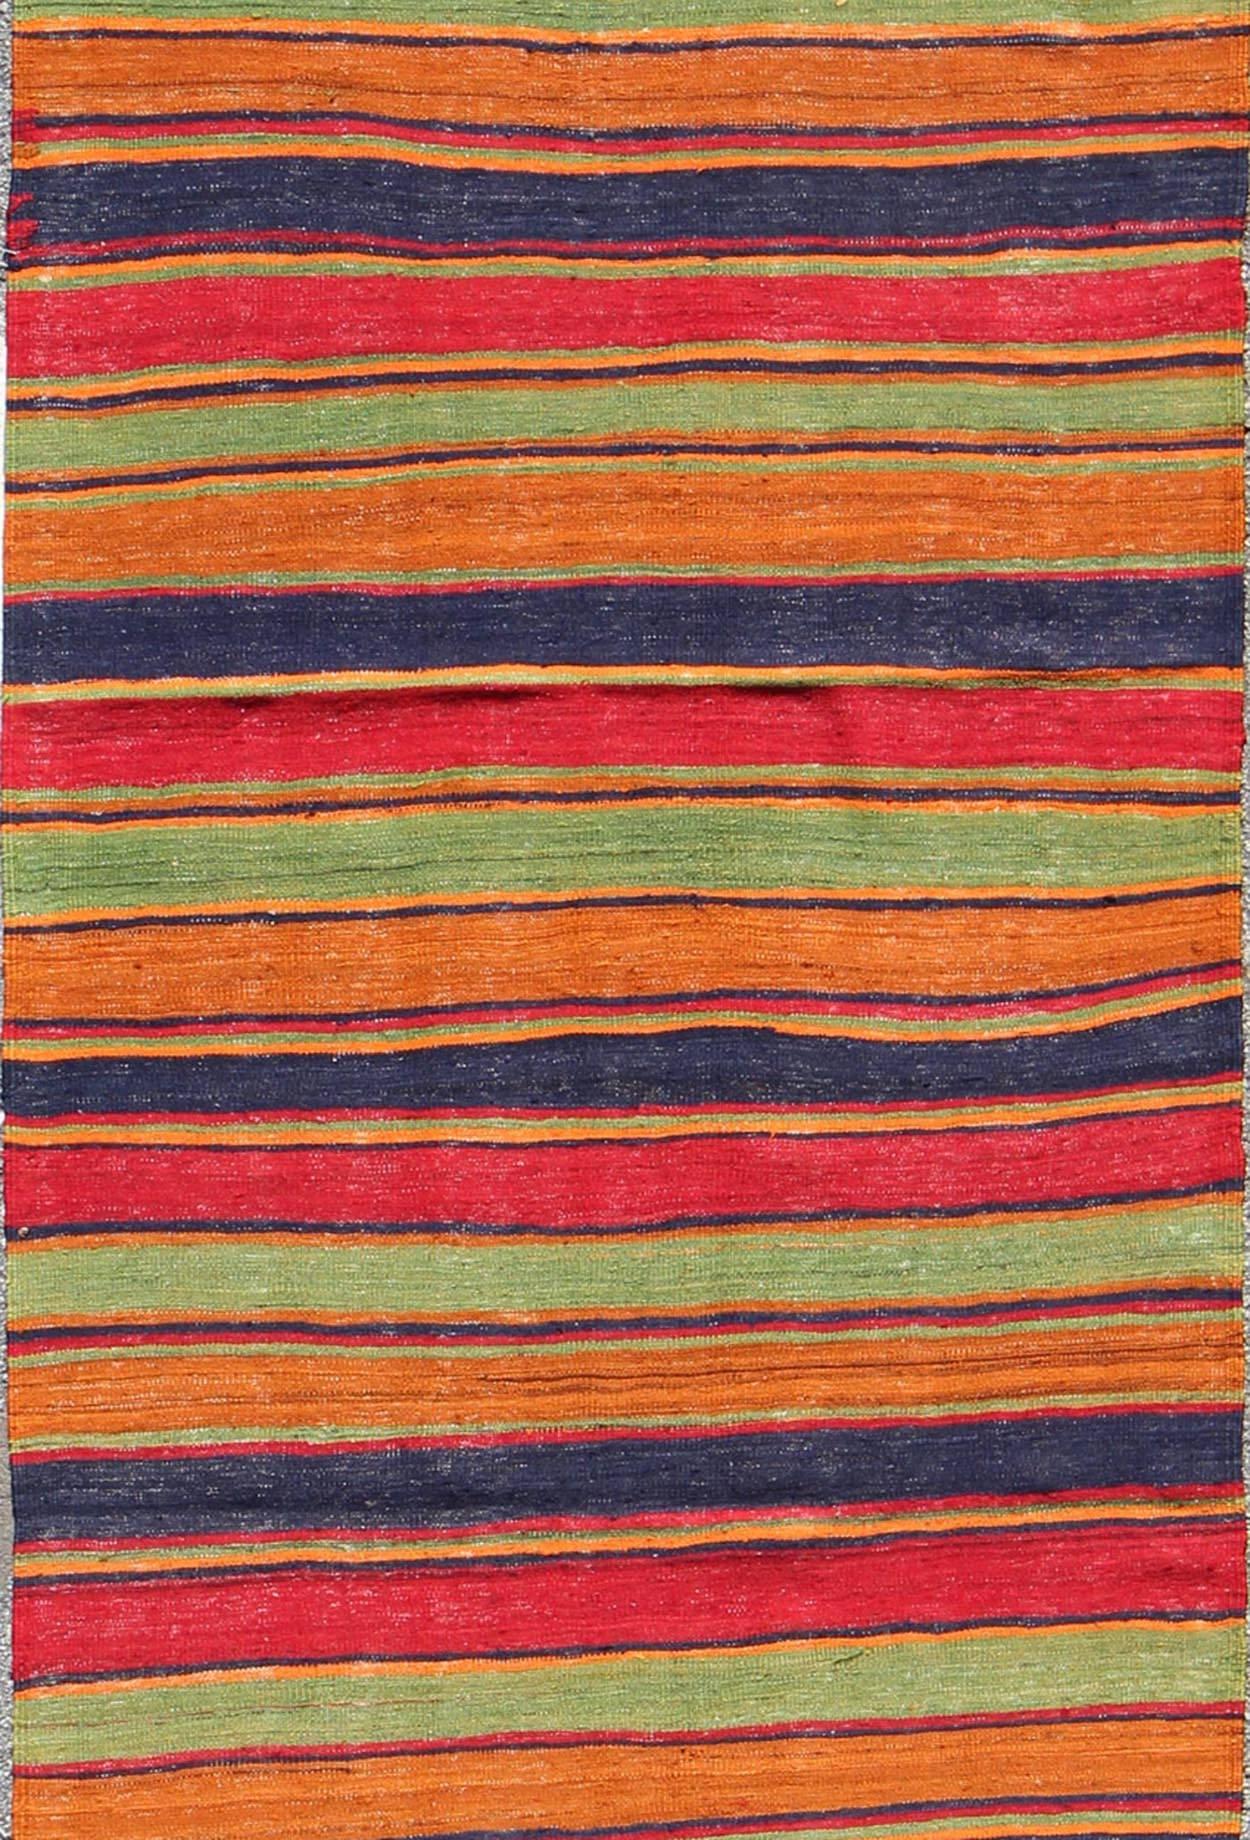 Hand-Woven Vintage Kilim Runner with Horizontal Stripes in Orange, Green, Blue, Red, Gold For Sale